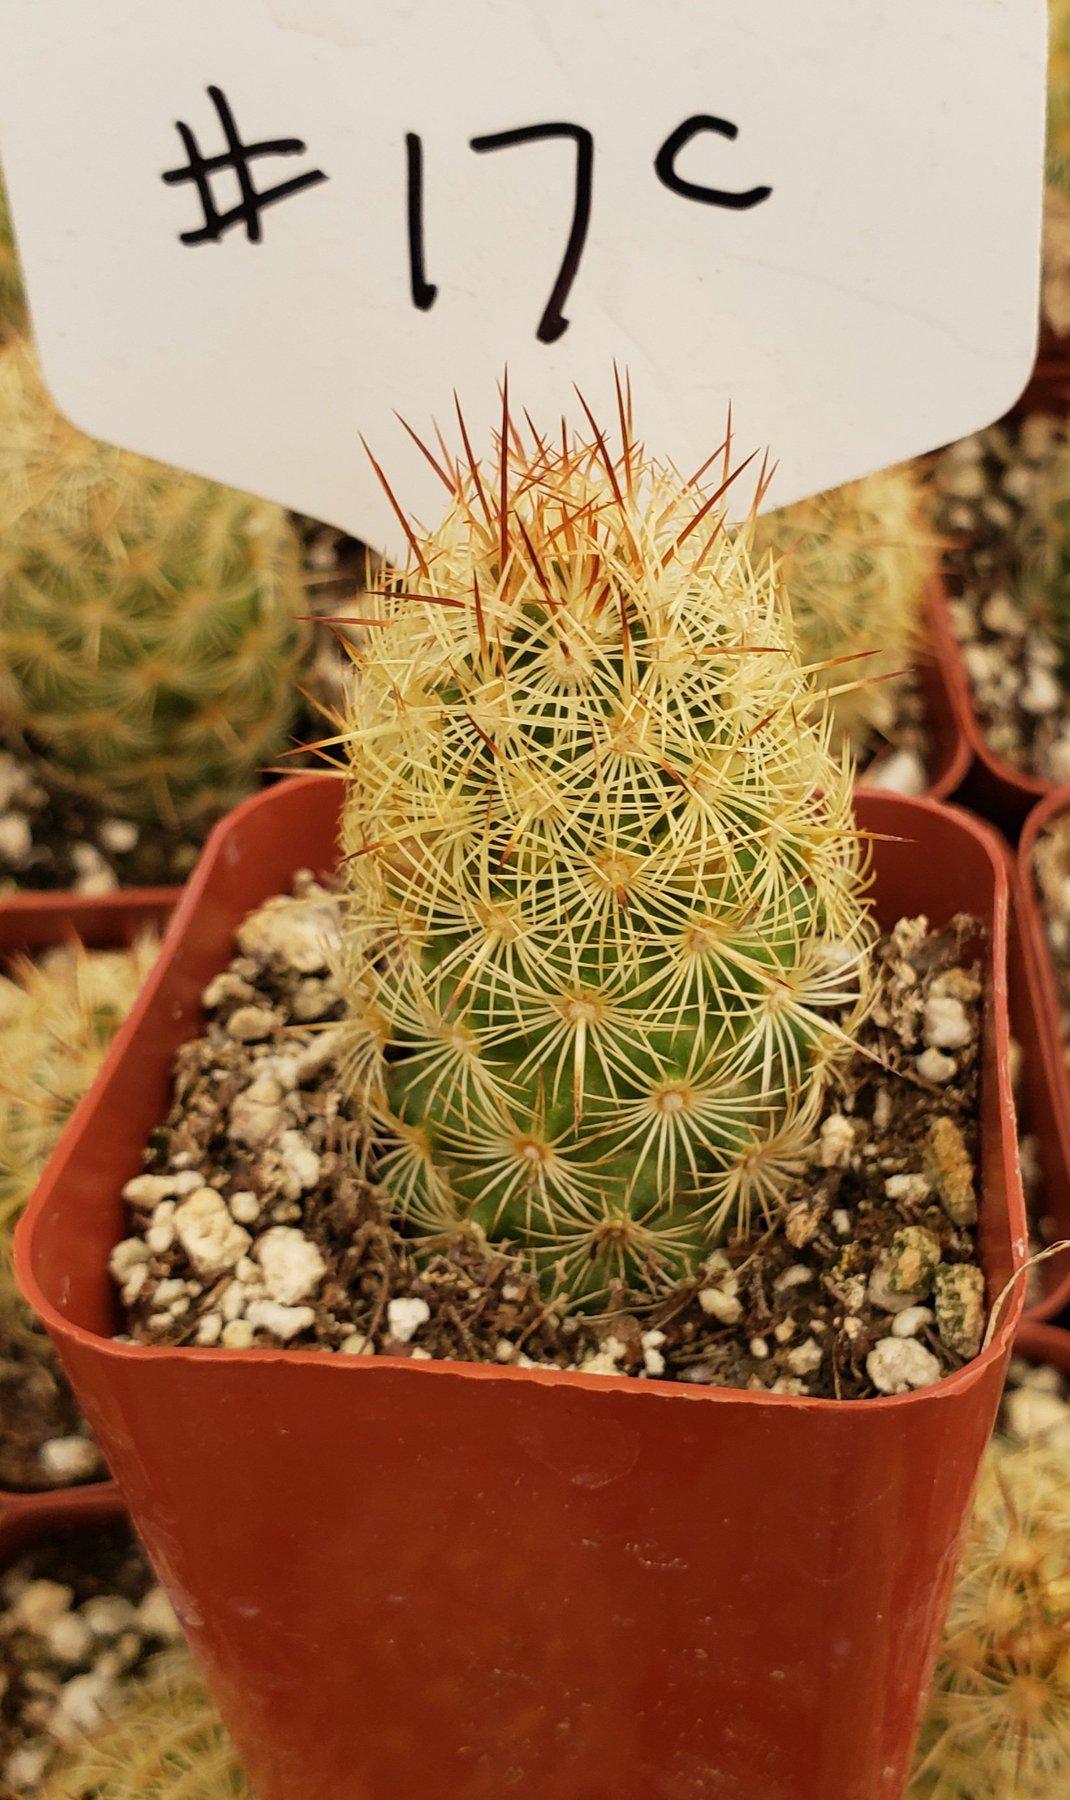 #17C Mammilaria Lady Finger 2"-Cactus - Small - Exact Type-The Succulent Source